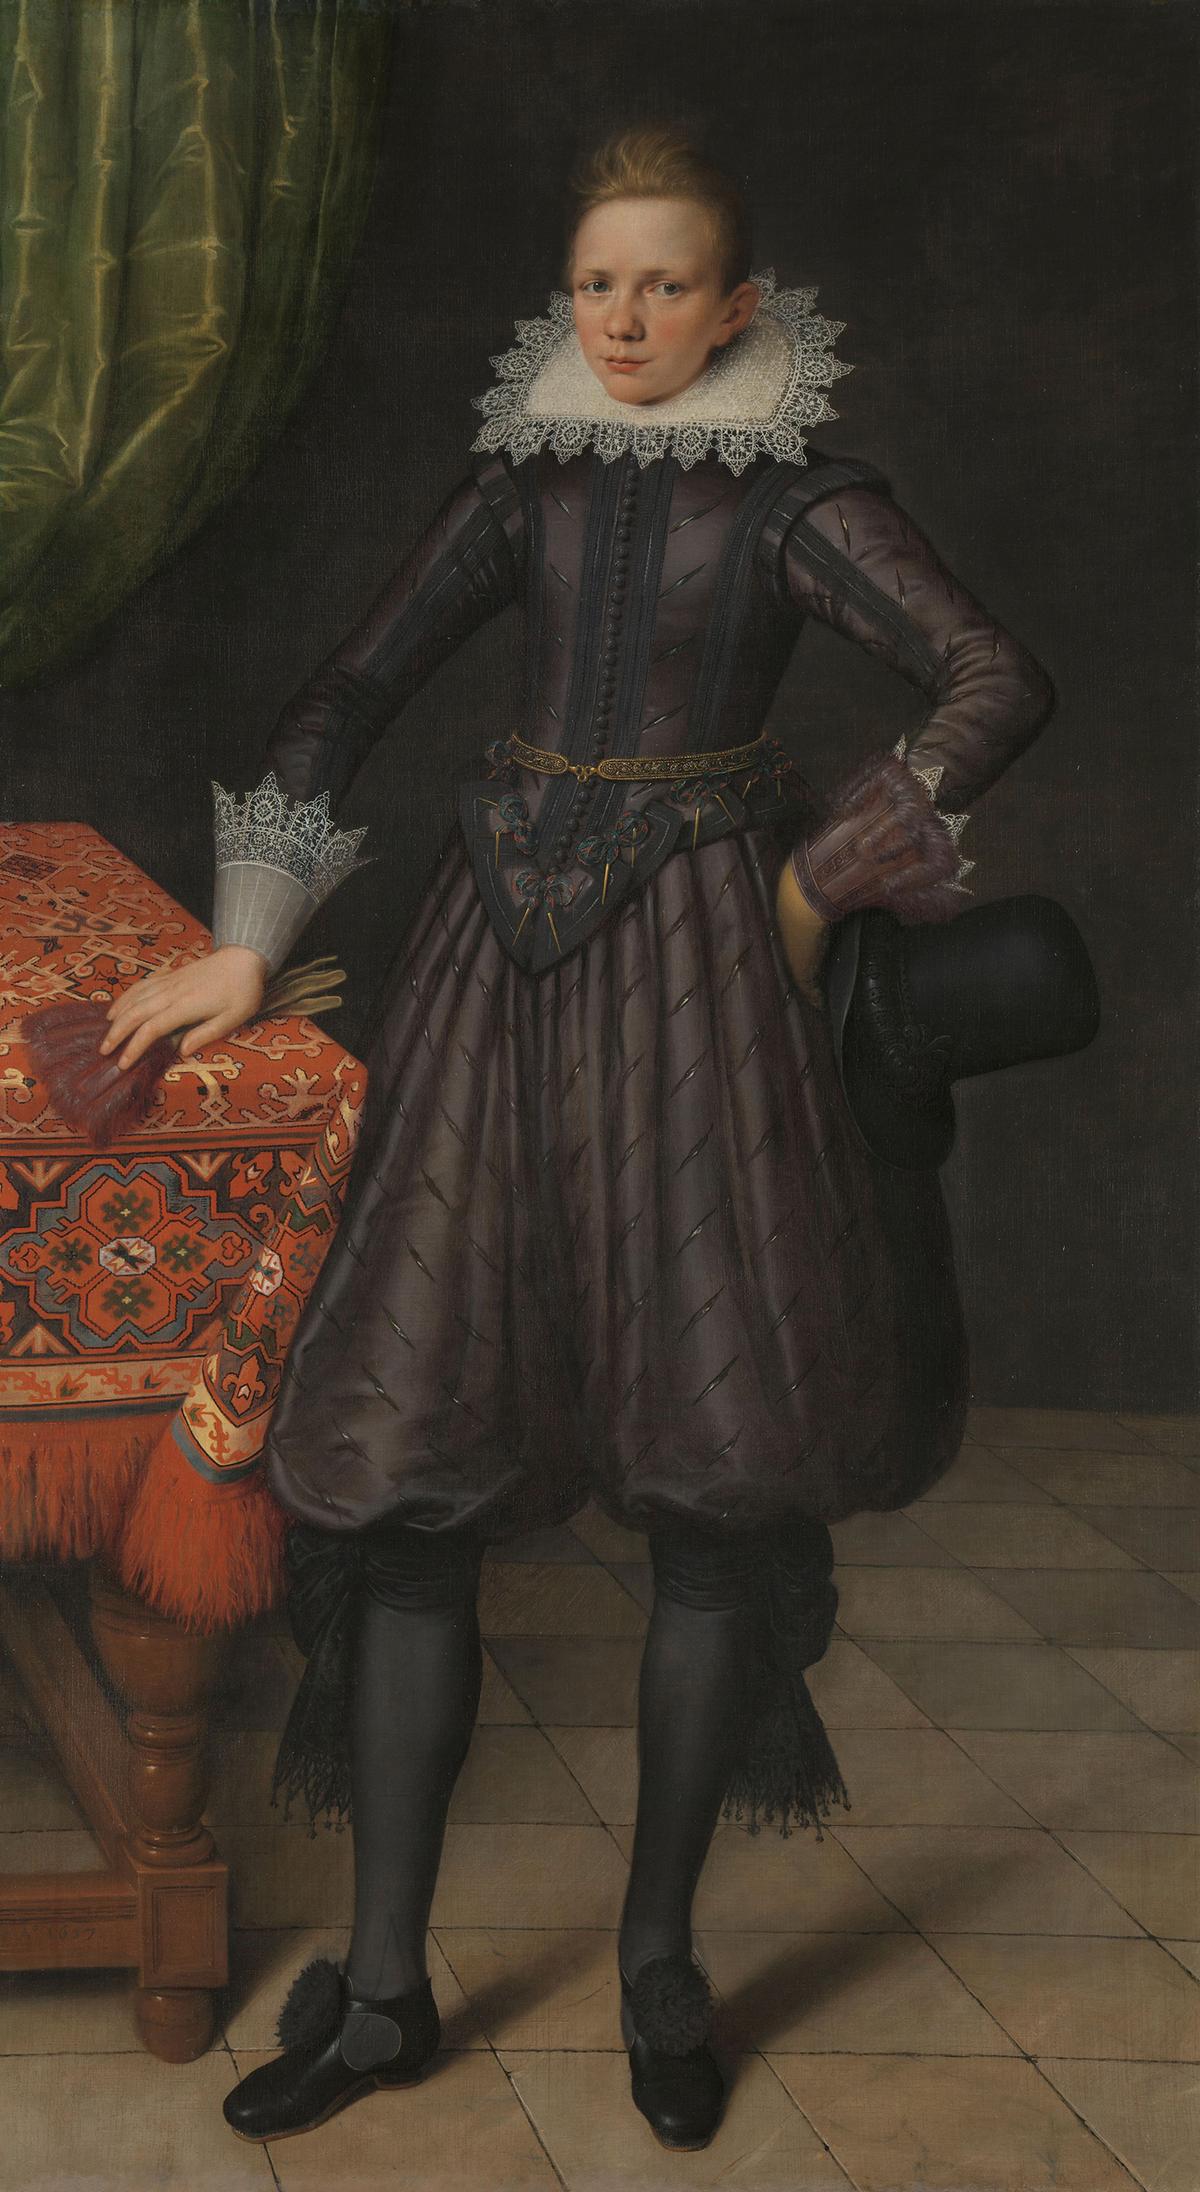 A portrait of Peter Courten, 1617, attributed to Salomon Mesdach. Oil on panel; 75 1/2 inches by 42 inches. Rijksmuseum, Amsterdam. (Public Domain)